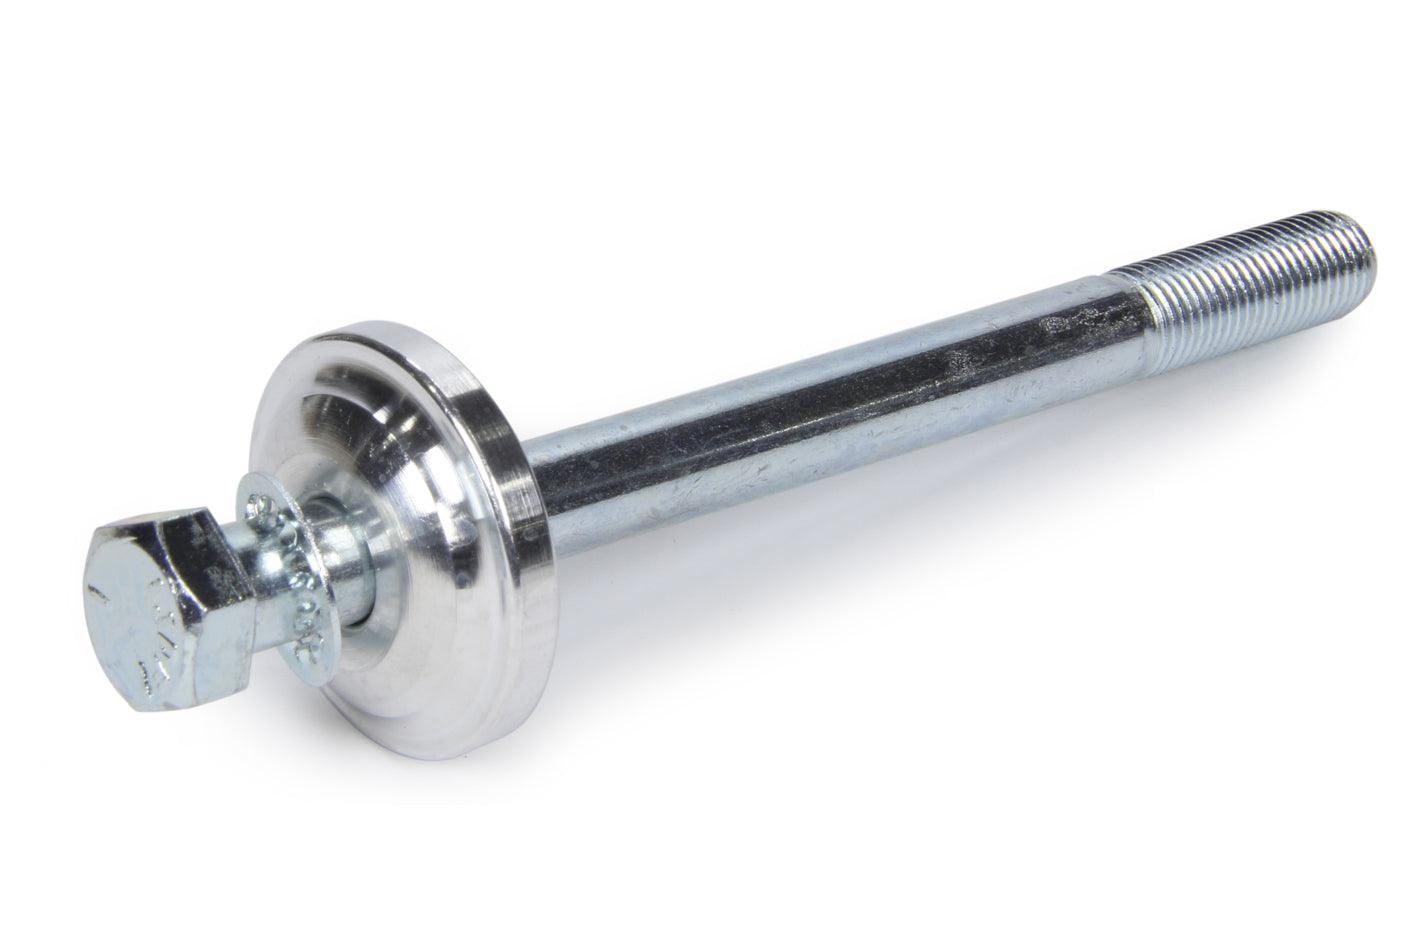 5.5in Long Bolt 7/16in Diameter w/ End Cap - Burlile Performance Products